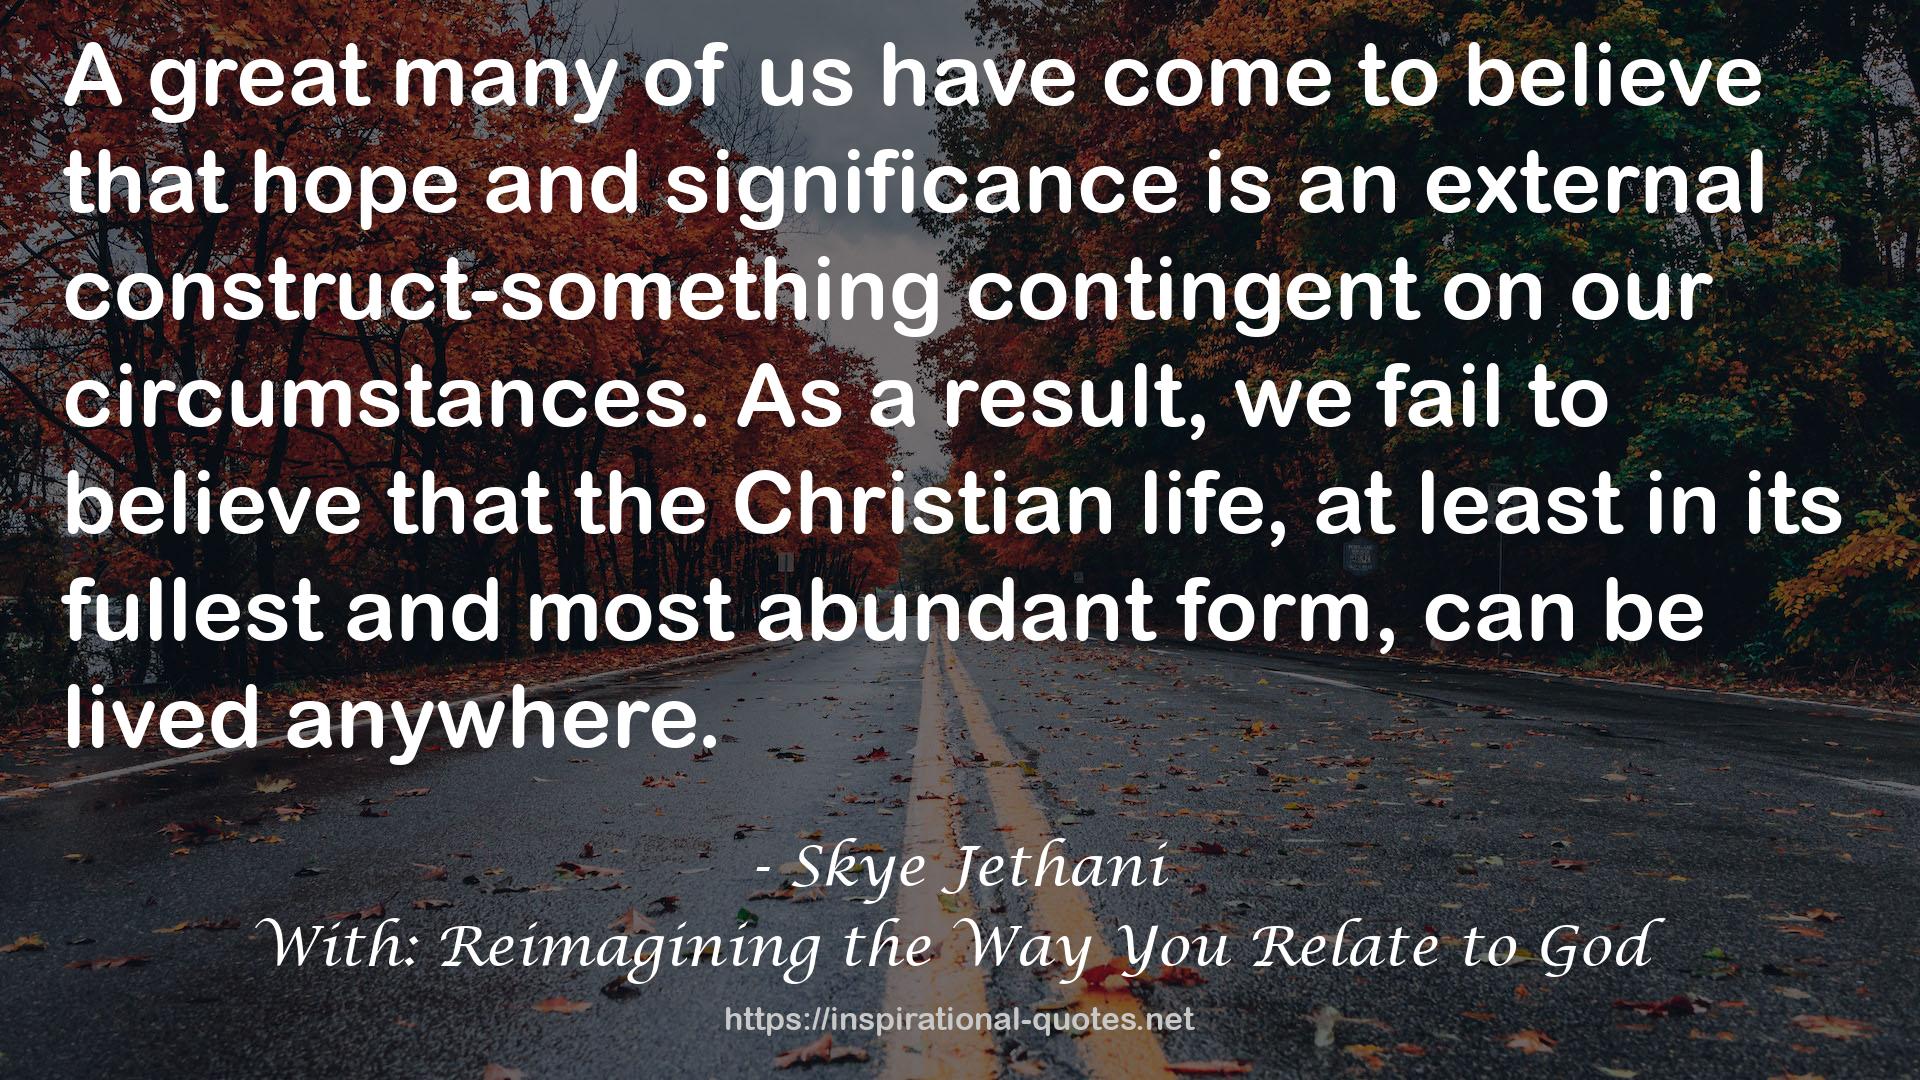 With: Reimagining the Way You Relate to God QUOTES